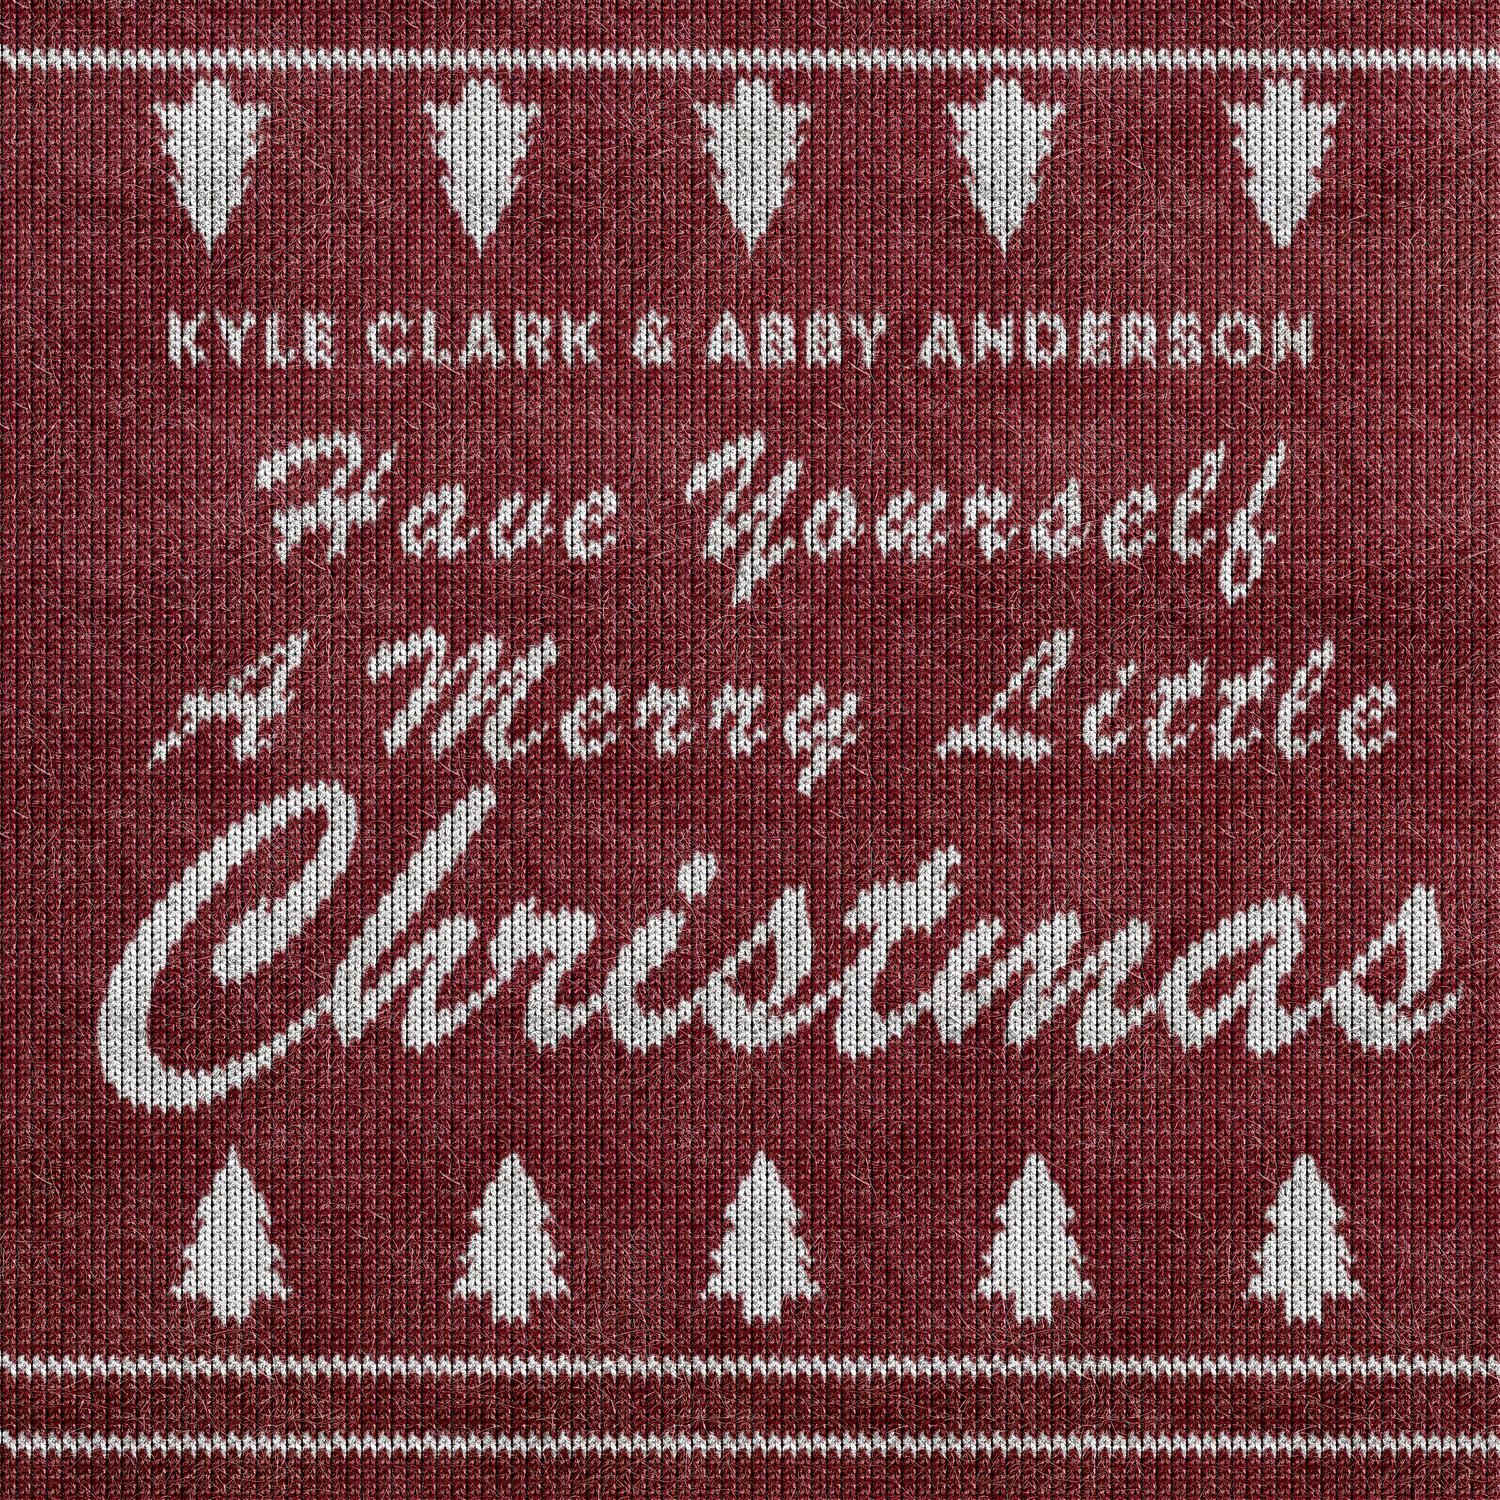 Kyle Clark - Have Yourself a Merry Little Christmas